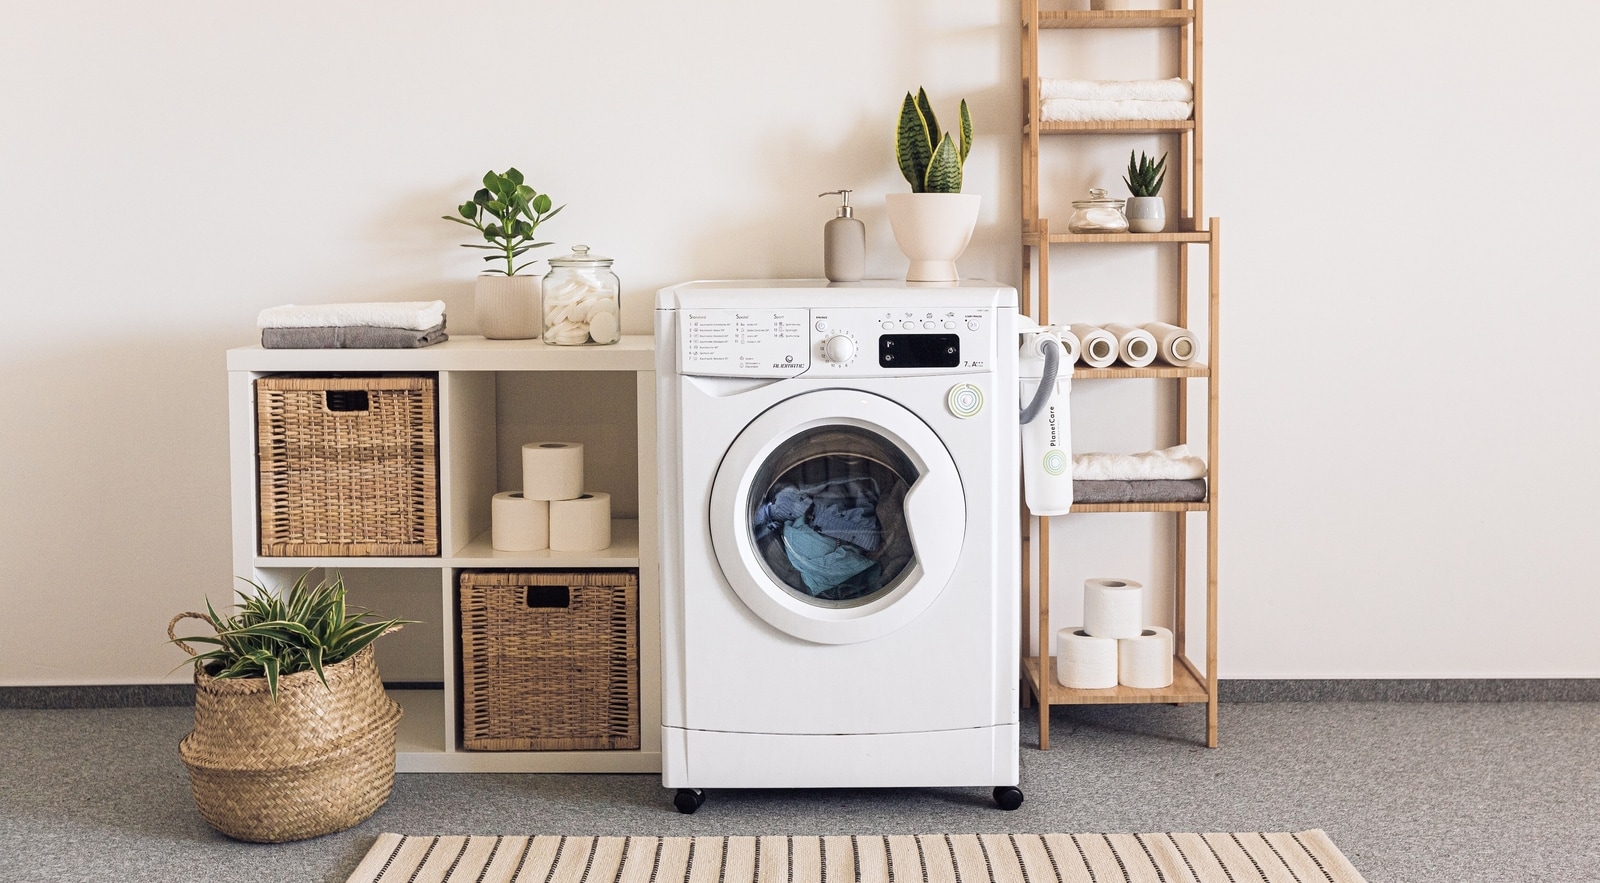 8 best washing machines available on Amazon – IFB to Samsung, check out these optimal laundry solutions